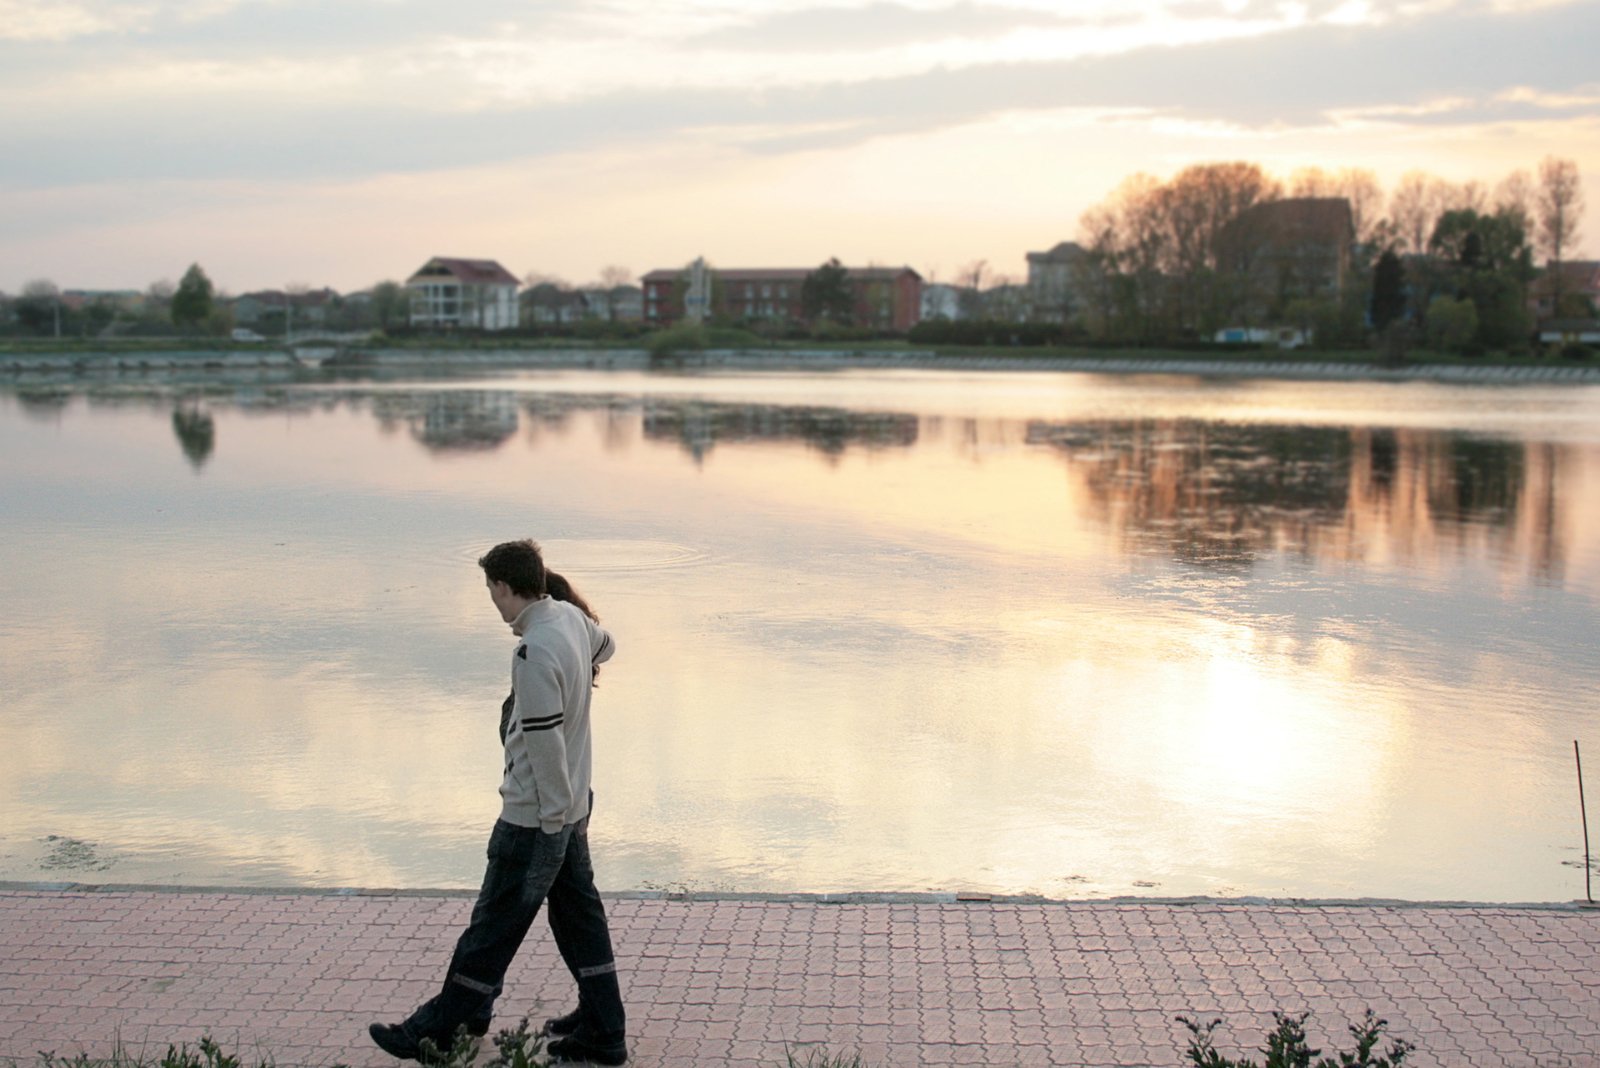 a man walks near a large pond in the evening